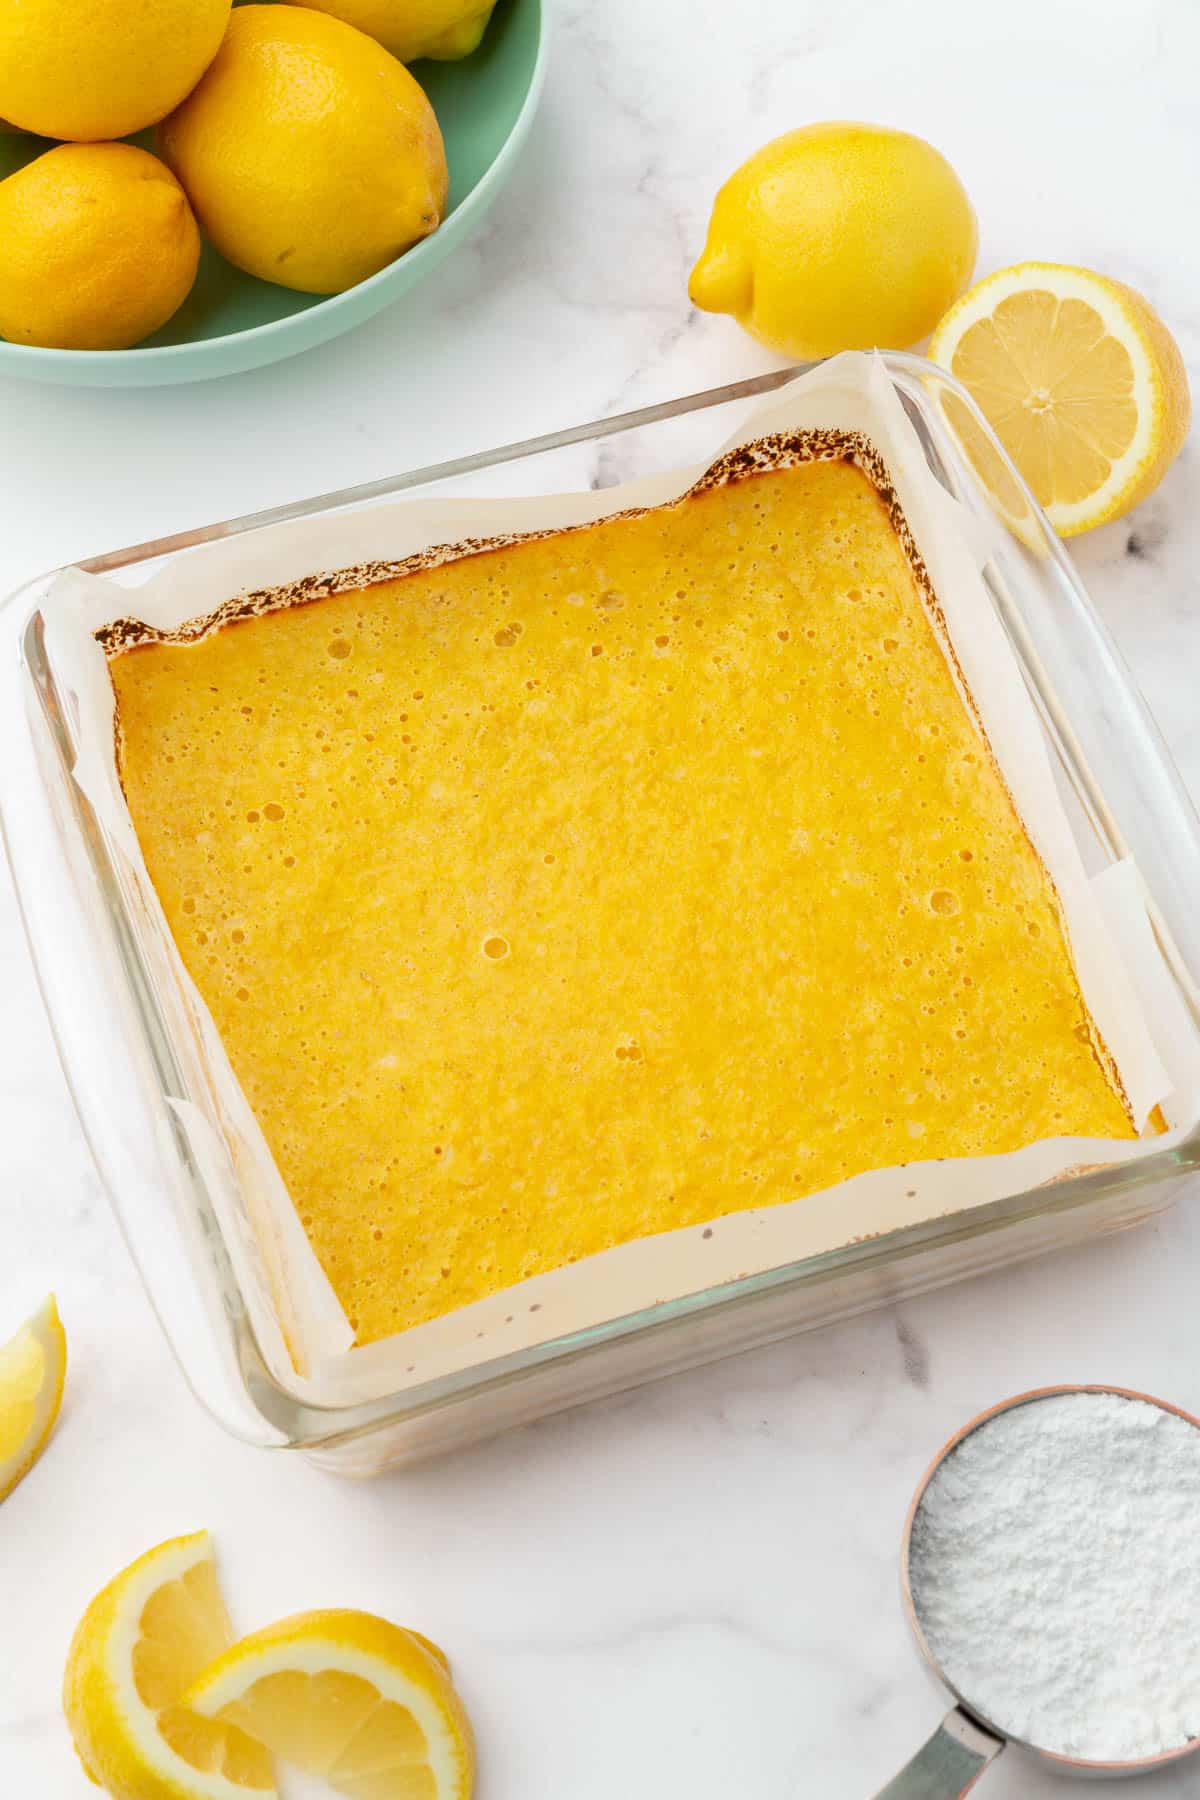 A square glass baking with baked gluten free lemon bars in it with a bowl of lemons and cut lemons in the background.